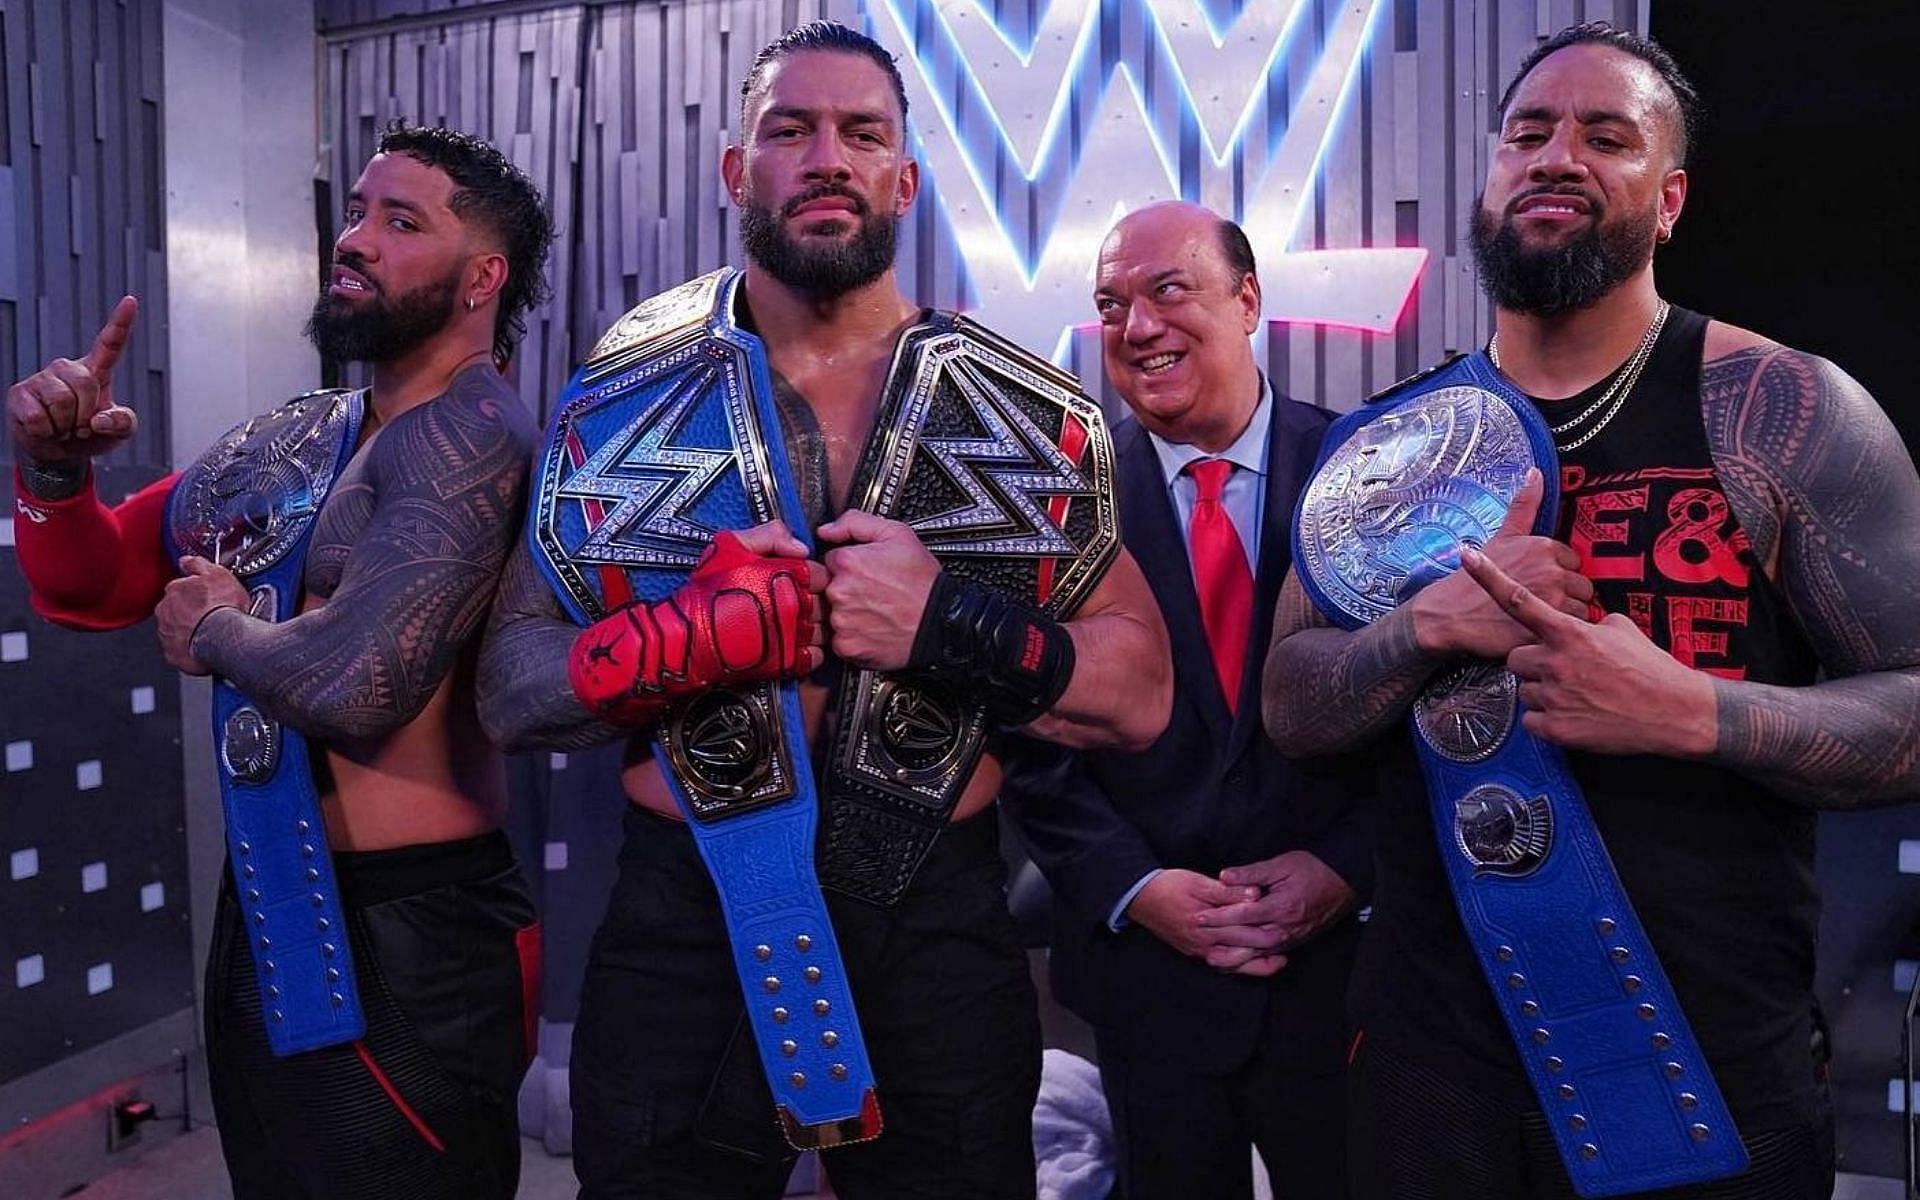 The Bloodline is the most dominant faction in WWE right now.